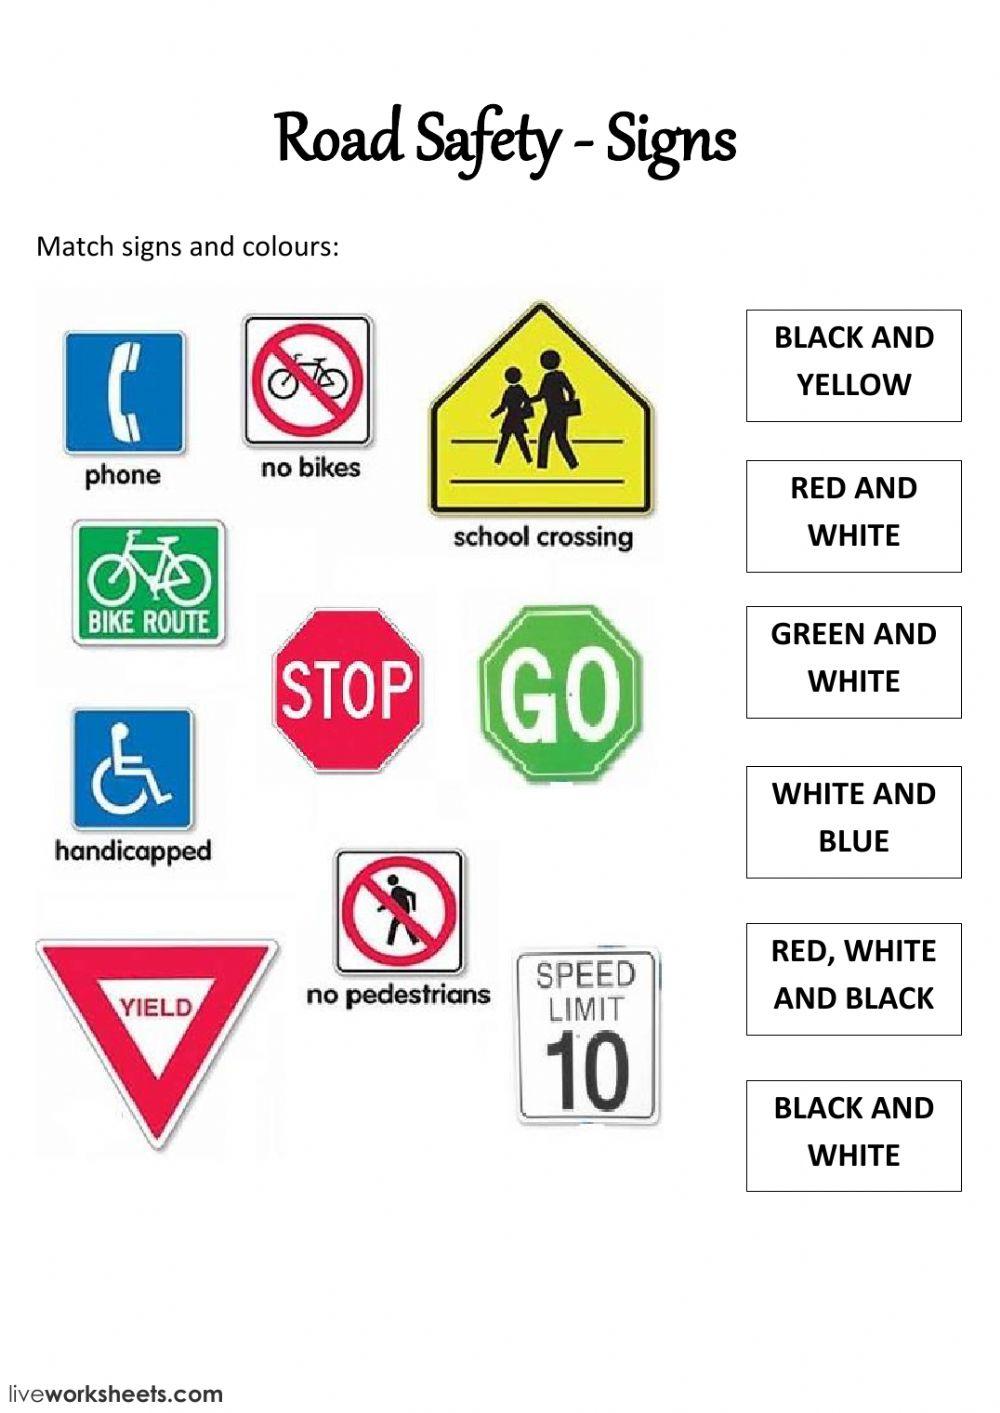 Road Safety - Signs